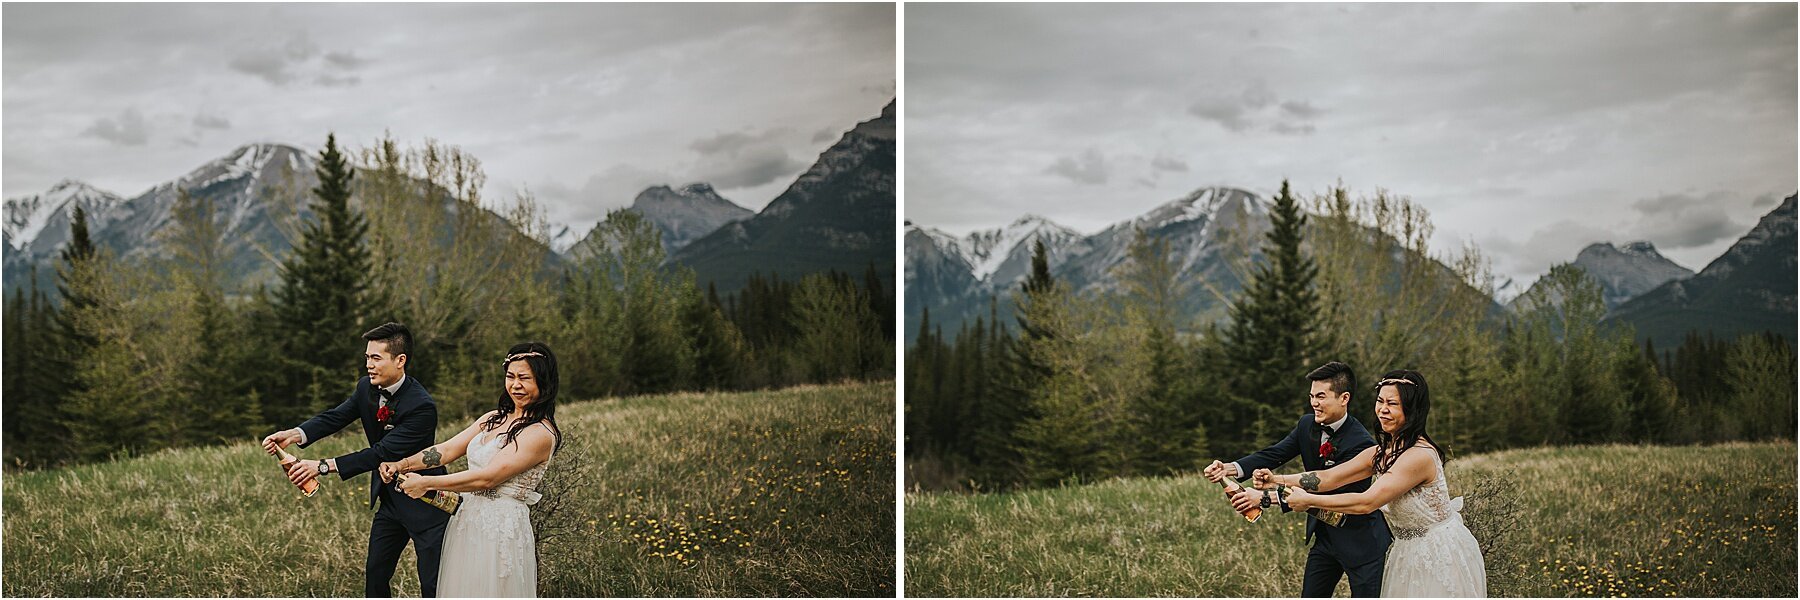 Intimate-Canmore-Alberta-Mountain-Elopement